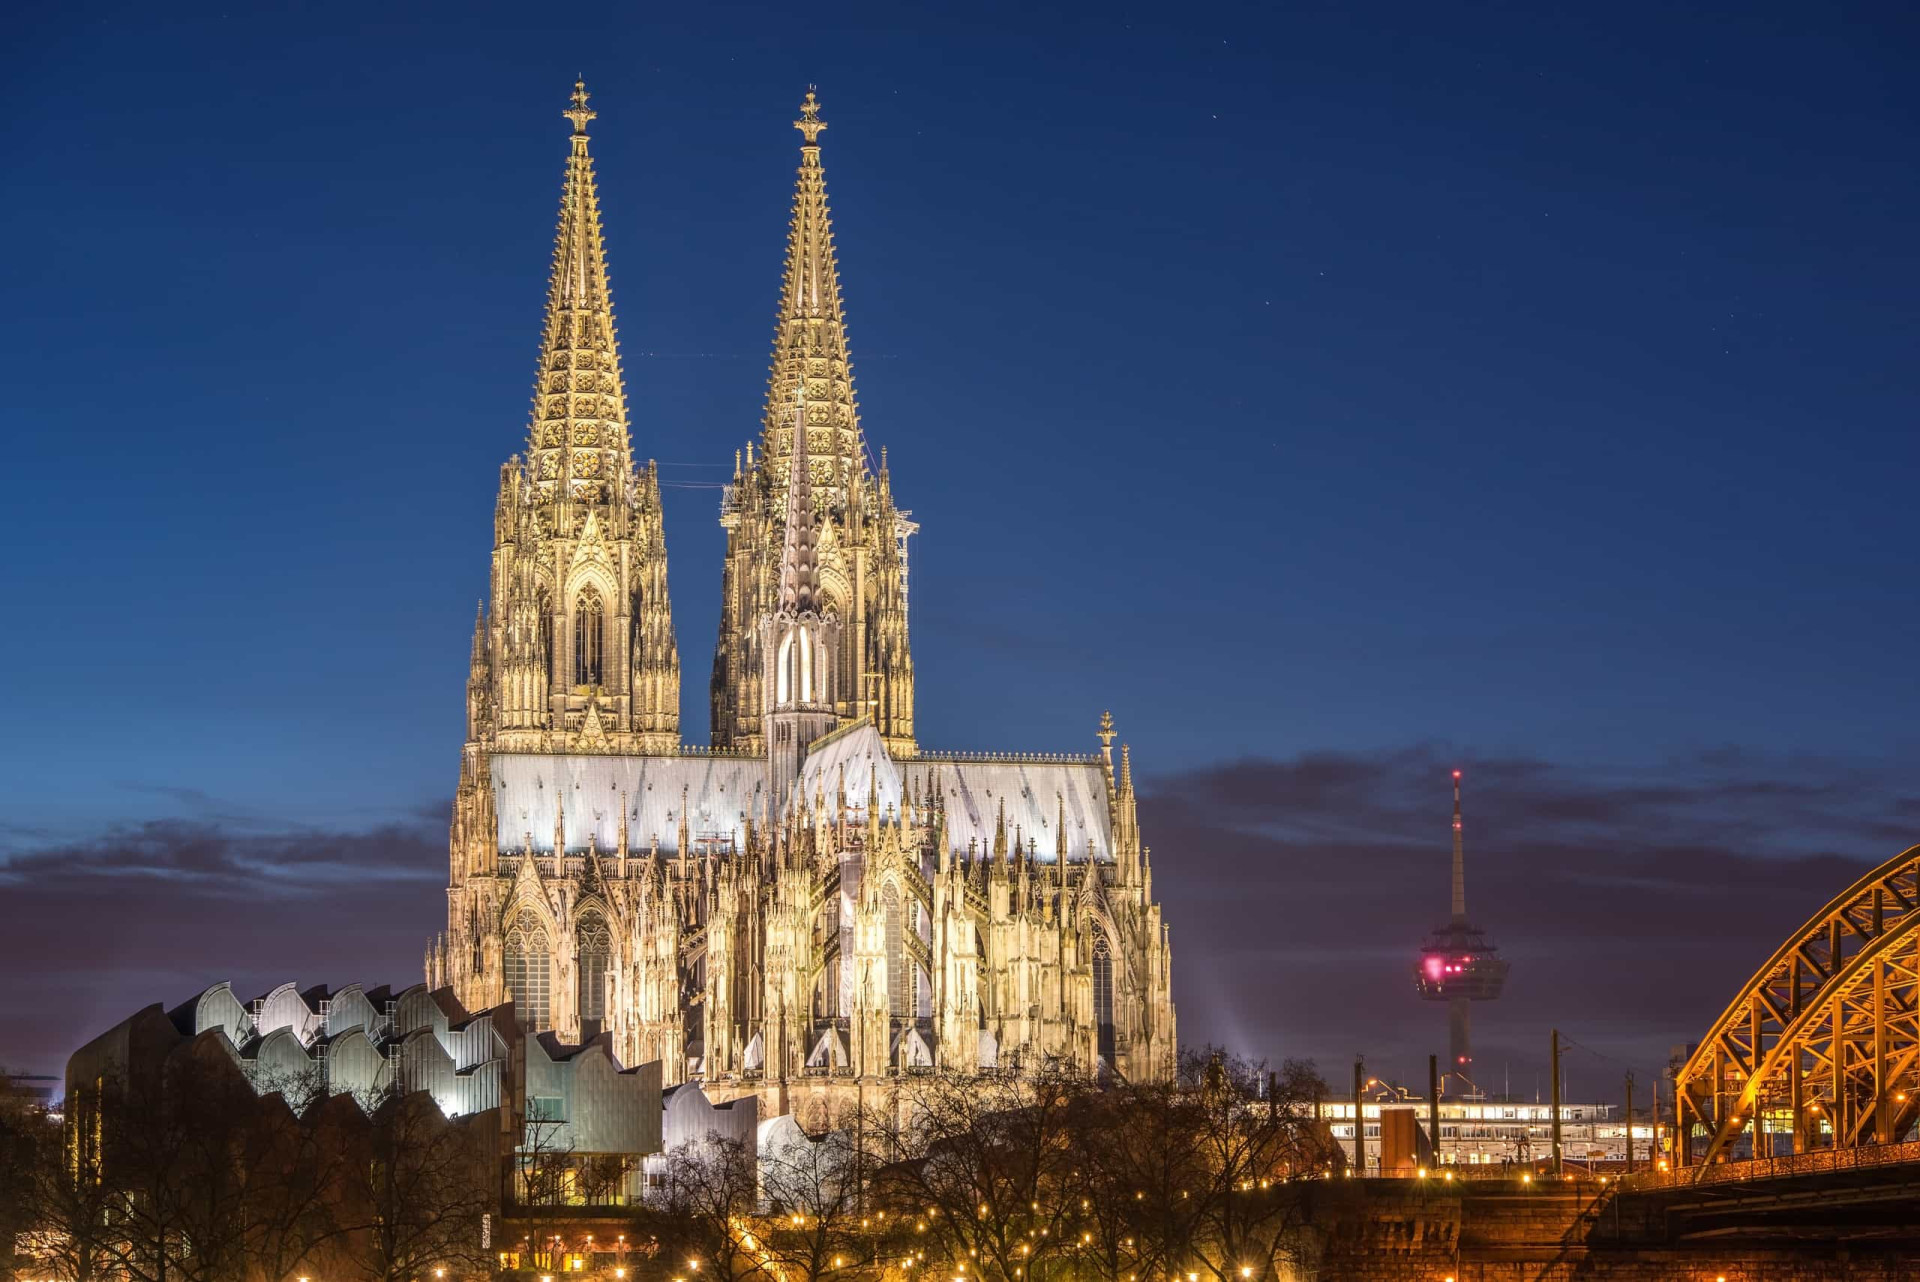 <p>Cologne's majestic cathedral is Germany’s largest, and currently the tallest twin-spired church in the world. It's also the country's most visited landmark, attracting tourist to its beautiful stained-glass murals and the dazzling Shrine of the Three Kings, said to contain the remains of the three wise men.</p><p><a href="https://www.msn.com/en-us/community/channel/vid-7xx8mnucu55yw63we9va2gwr7uihbxwc68fxqp25x6tg4ftibpra?cvid=94631541bc0f4f89bfd59158d696ad7e">Follow us and access great exclusive content every day</a></p>